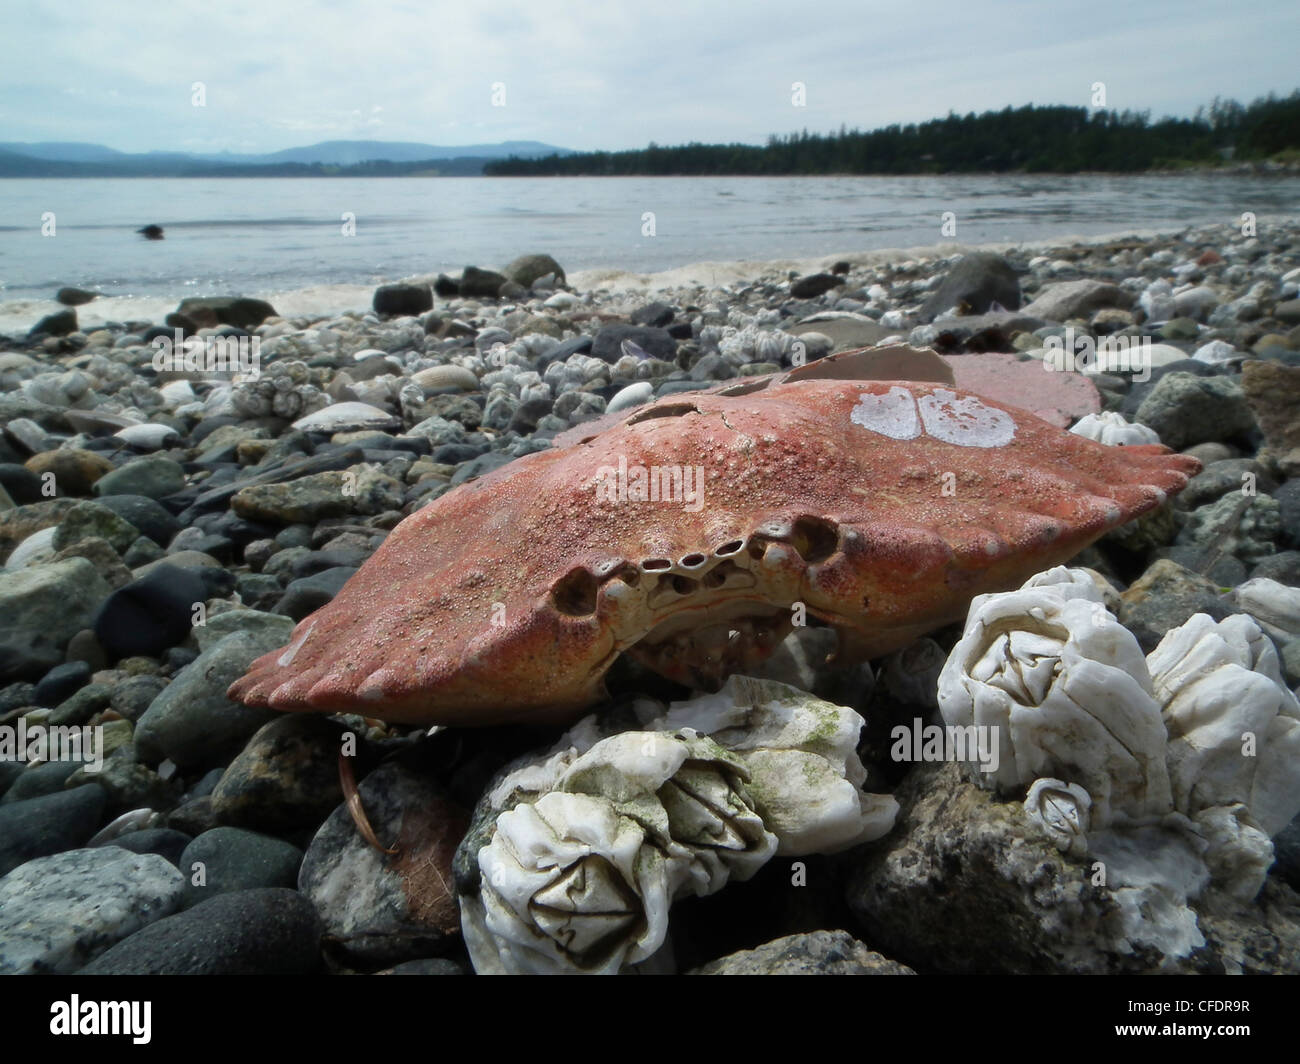 The shell of a red rock crab (Cancer productus) Patricia Bay, Vancouver Island, British Collumbia, Canada Stock Photo